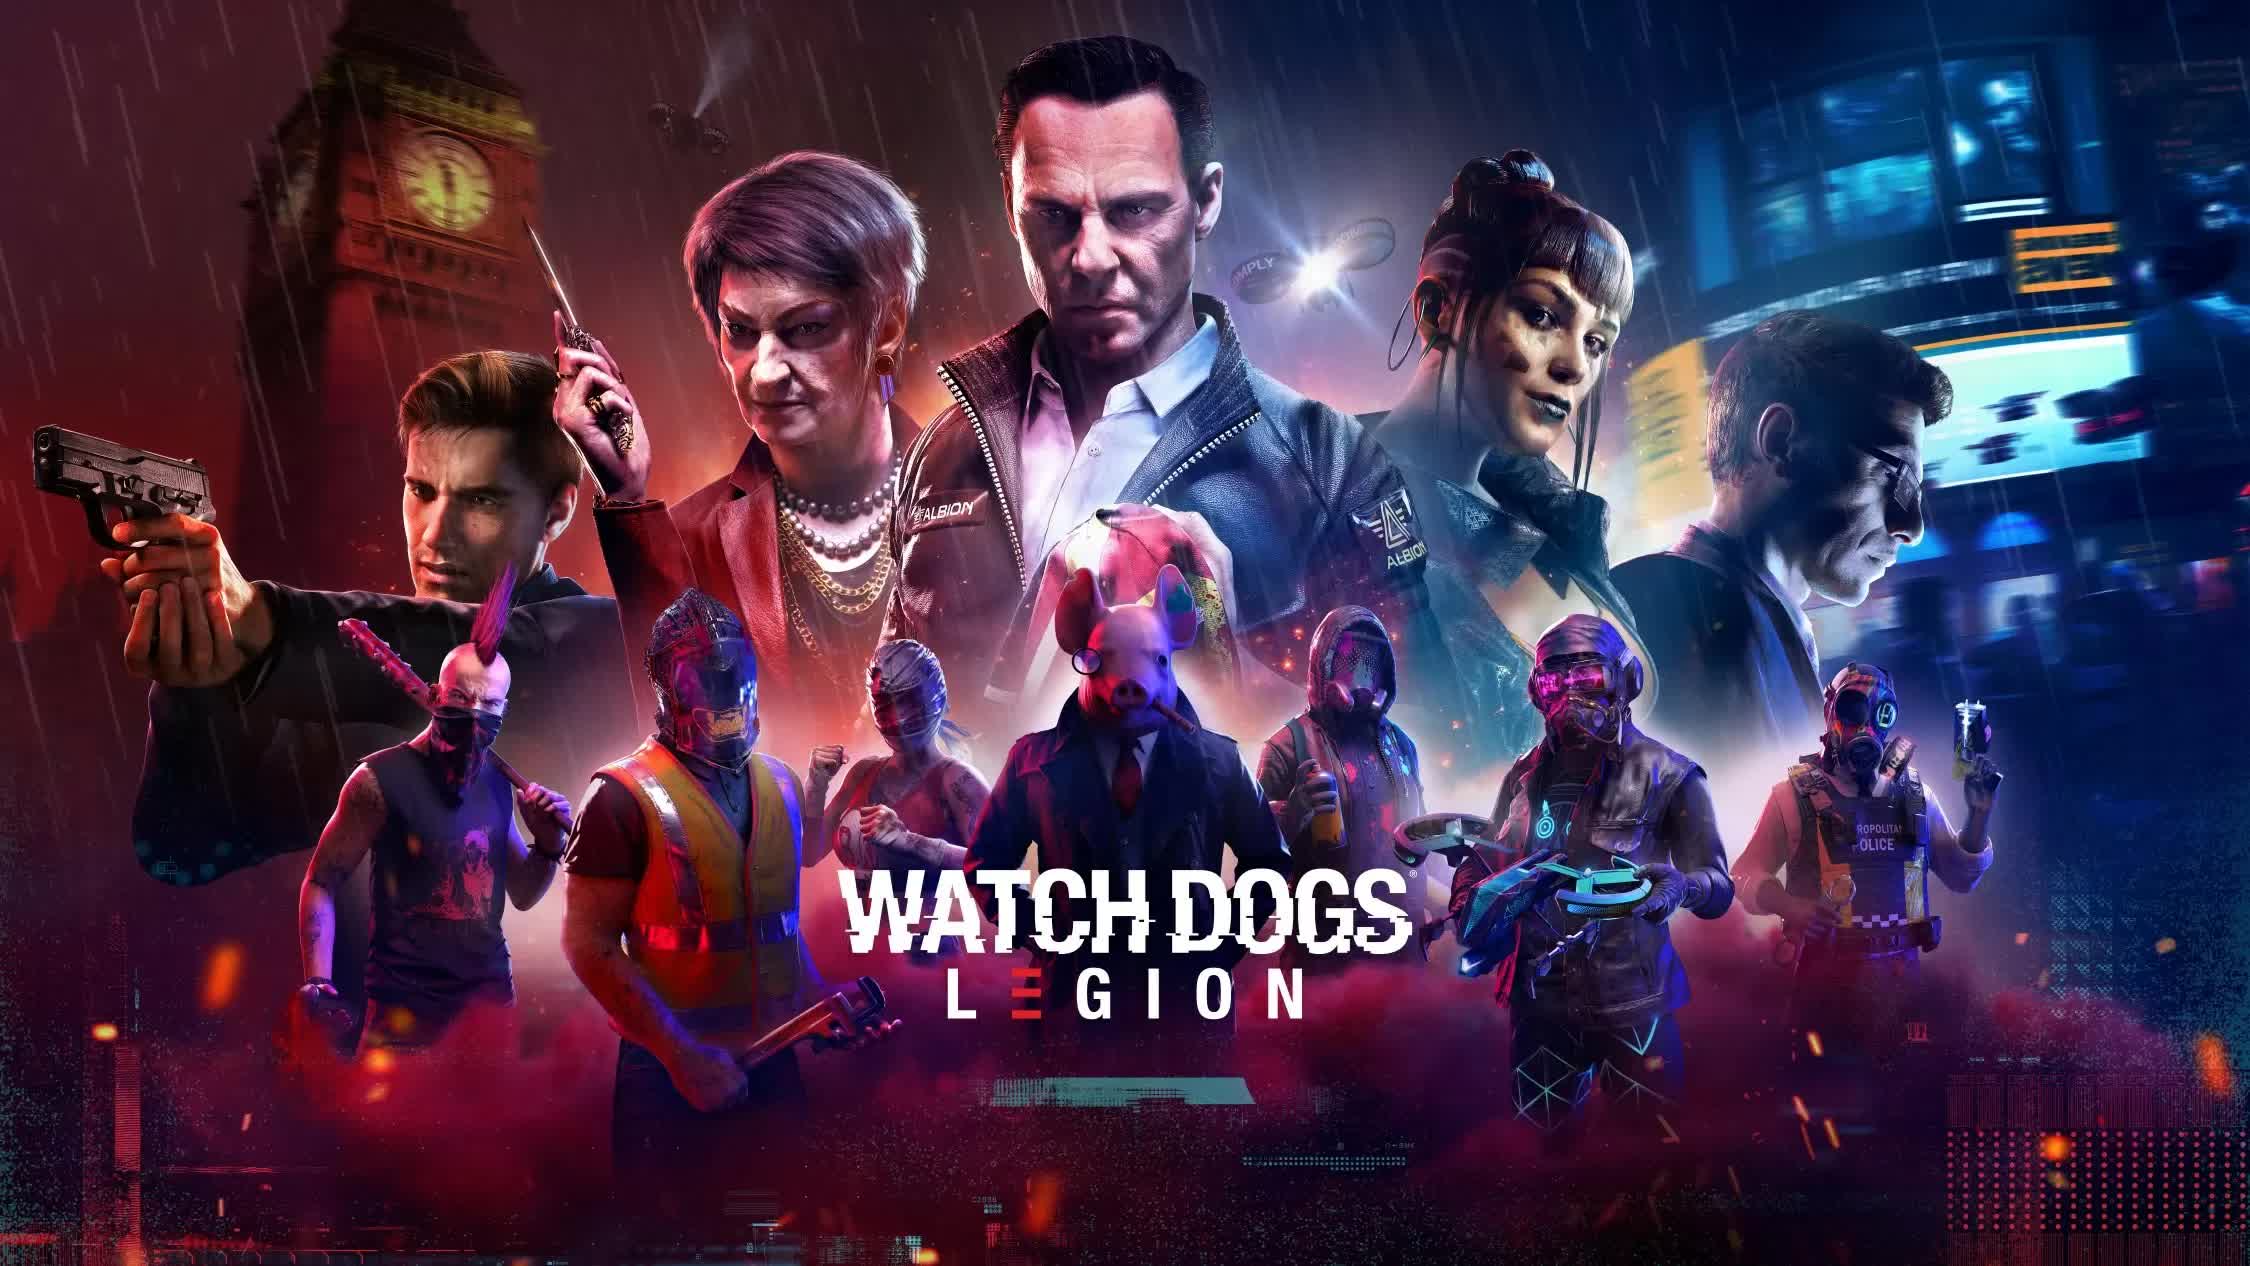 Watch Dogs Legion pre-loading starts today, here's everything you need to know